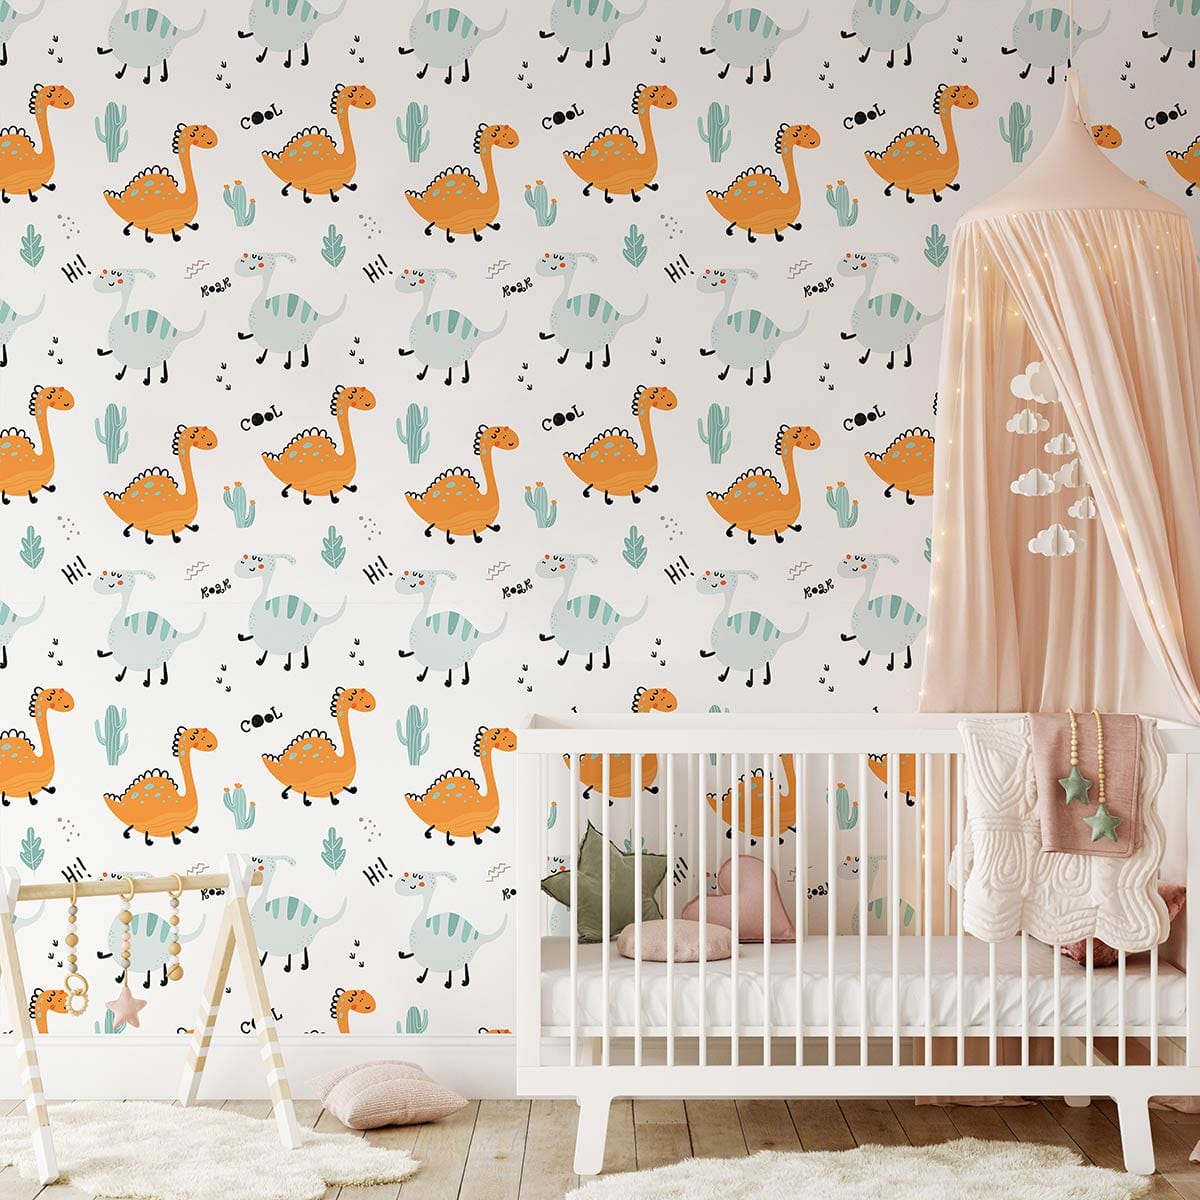 Baby room wallpaper with a dinosaur pattern at a small scale.